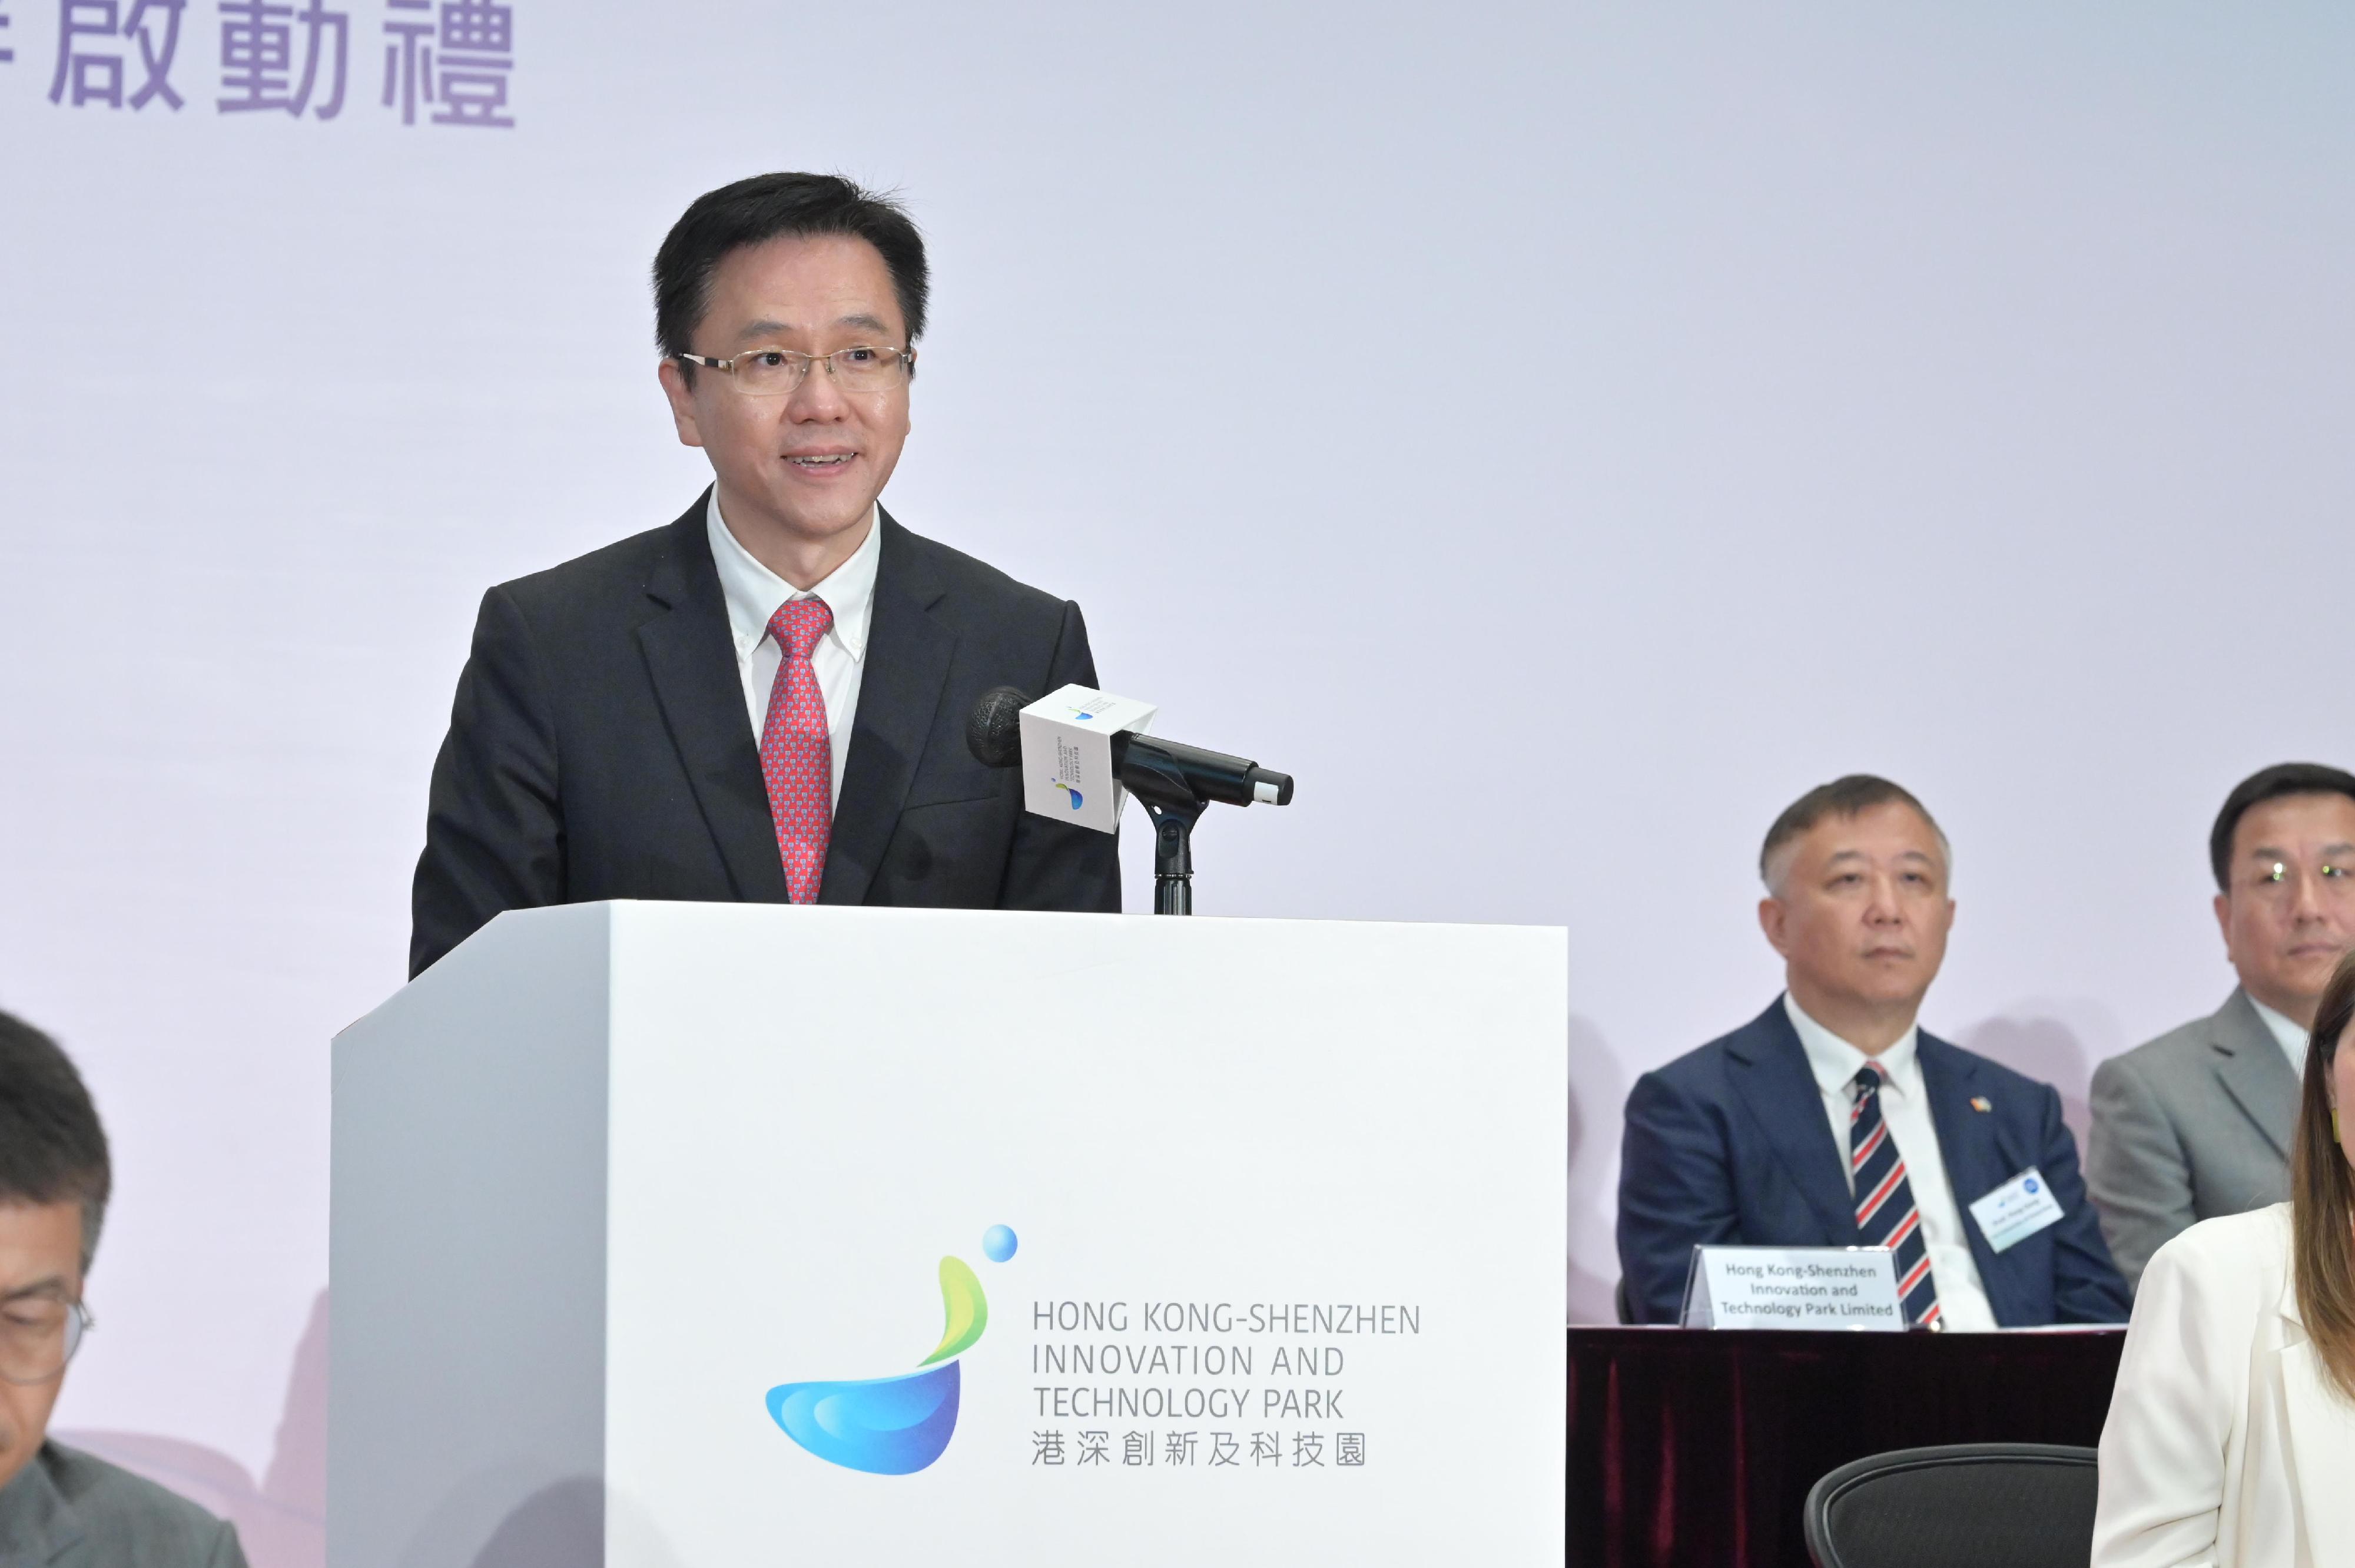 The Secretary for Innovation, Technology and Industry, Professor Sun Dong, speaks at the Hong Kong-Shenzhen Innovation and Technology Park Partnership Launching Ceremony today (April 18).